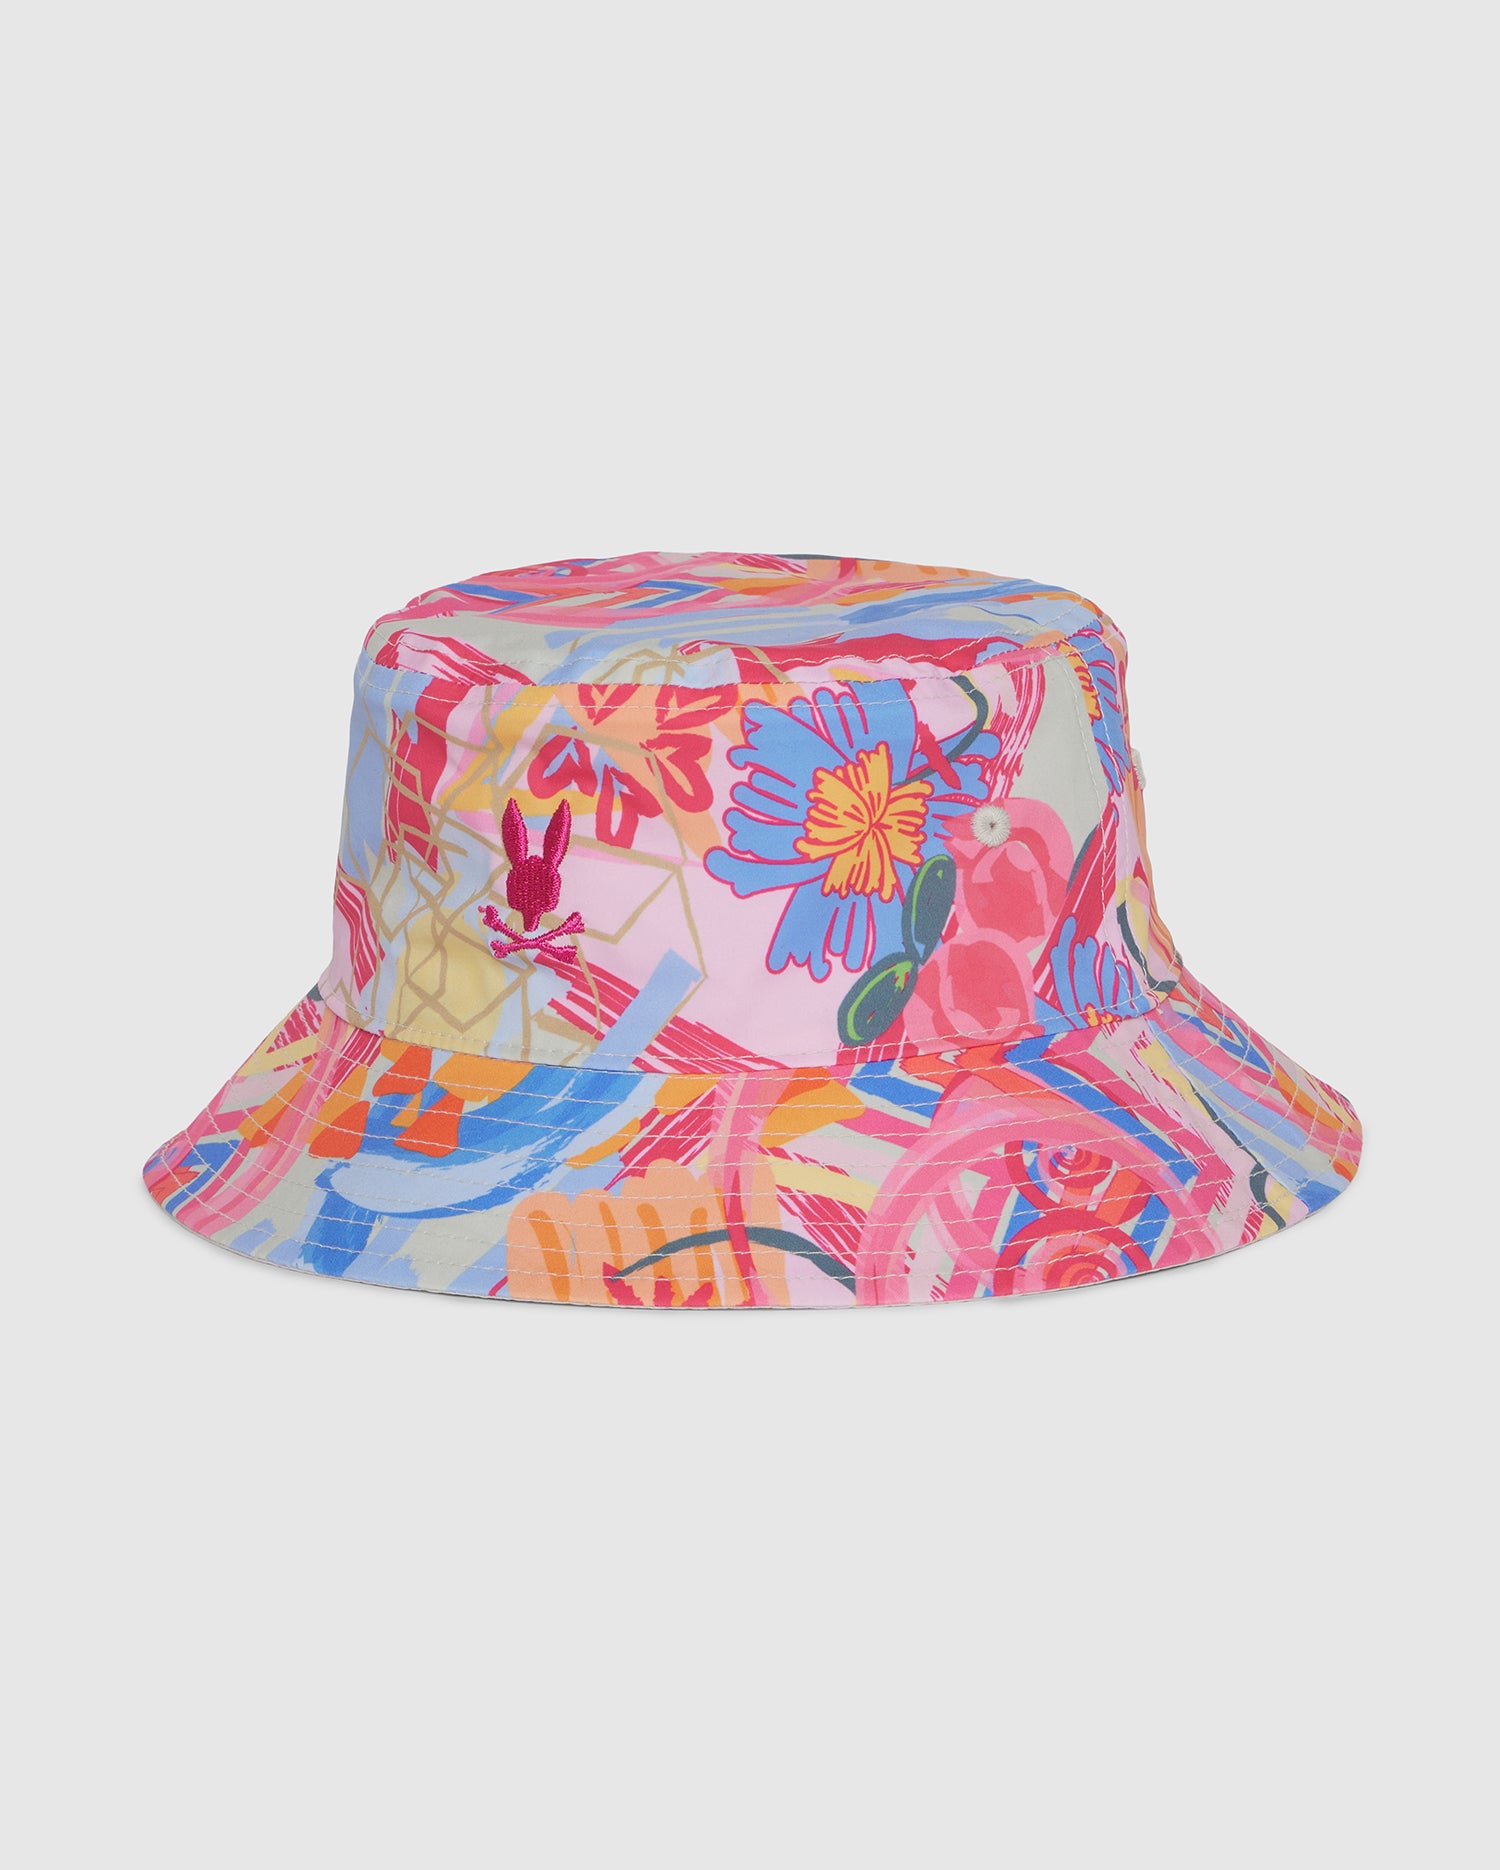 The Psycho Bunny KIDS BENTON REVERSIBLE BUCKET HAT - B0A323B2HT is a colorful accessory featuring a vibrant floral and bird print on a white background. Large flowers and parrots in shades of pink, blue, yellow, and red give it a lively, tropical appearance. This reversible bucket hat is perfect for adding a fun touch to any outfit.